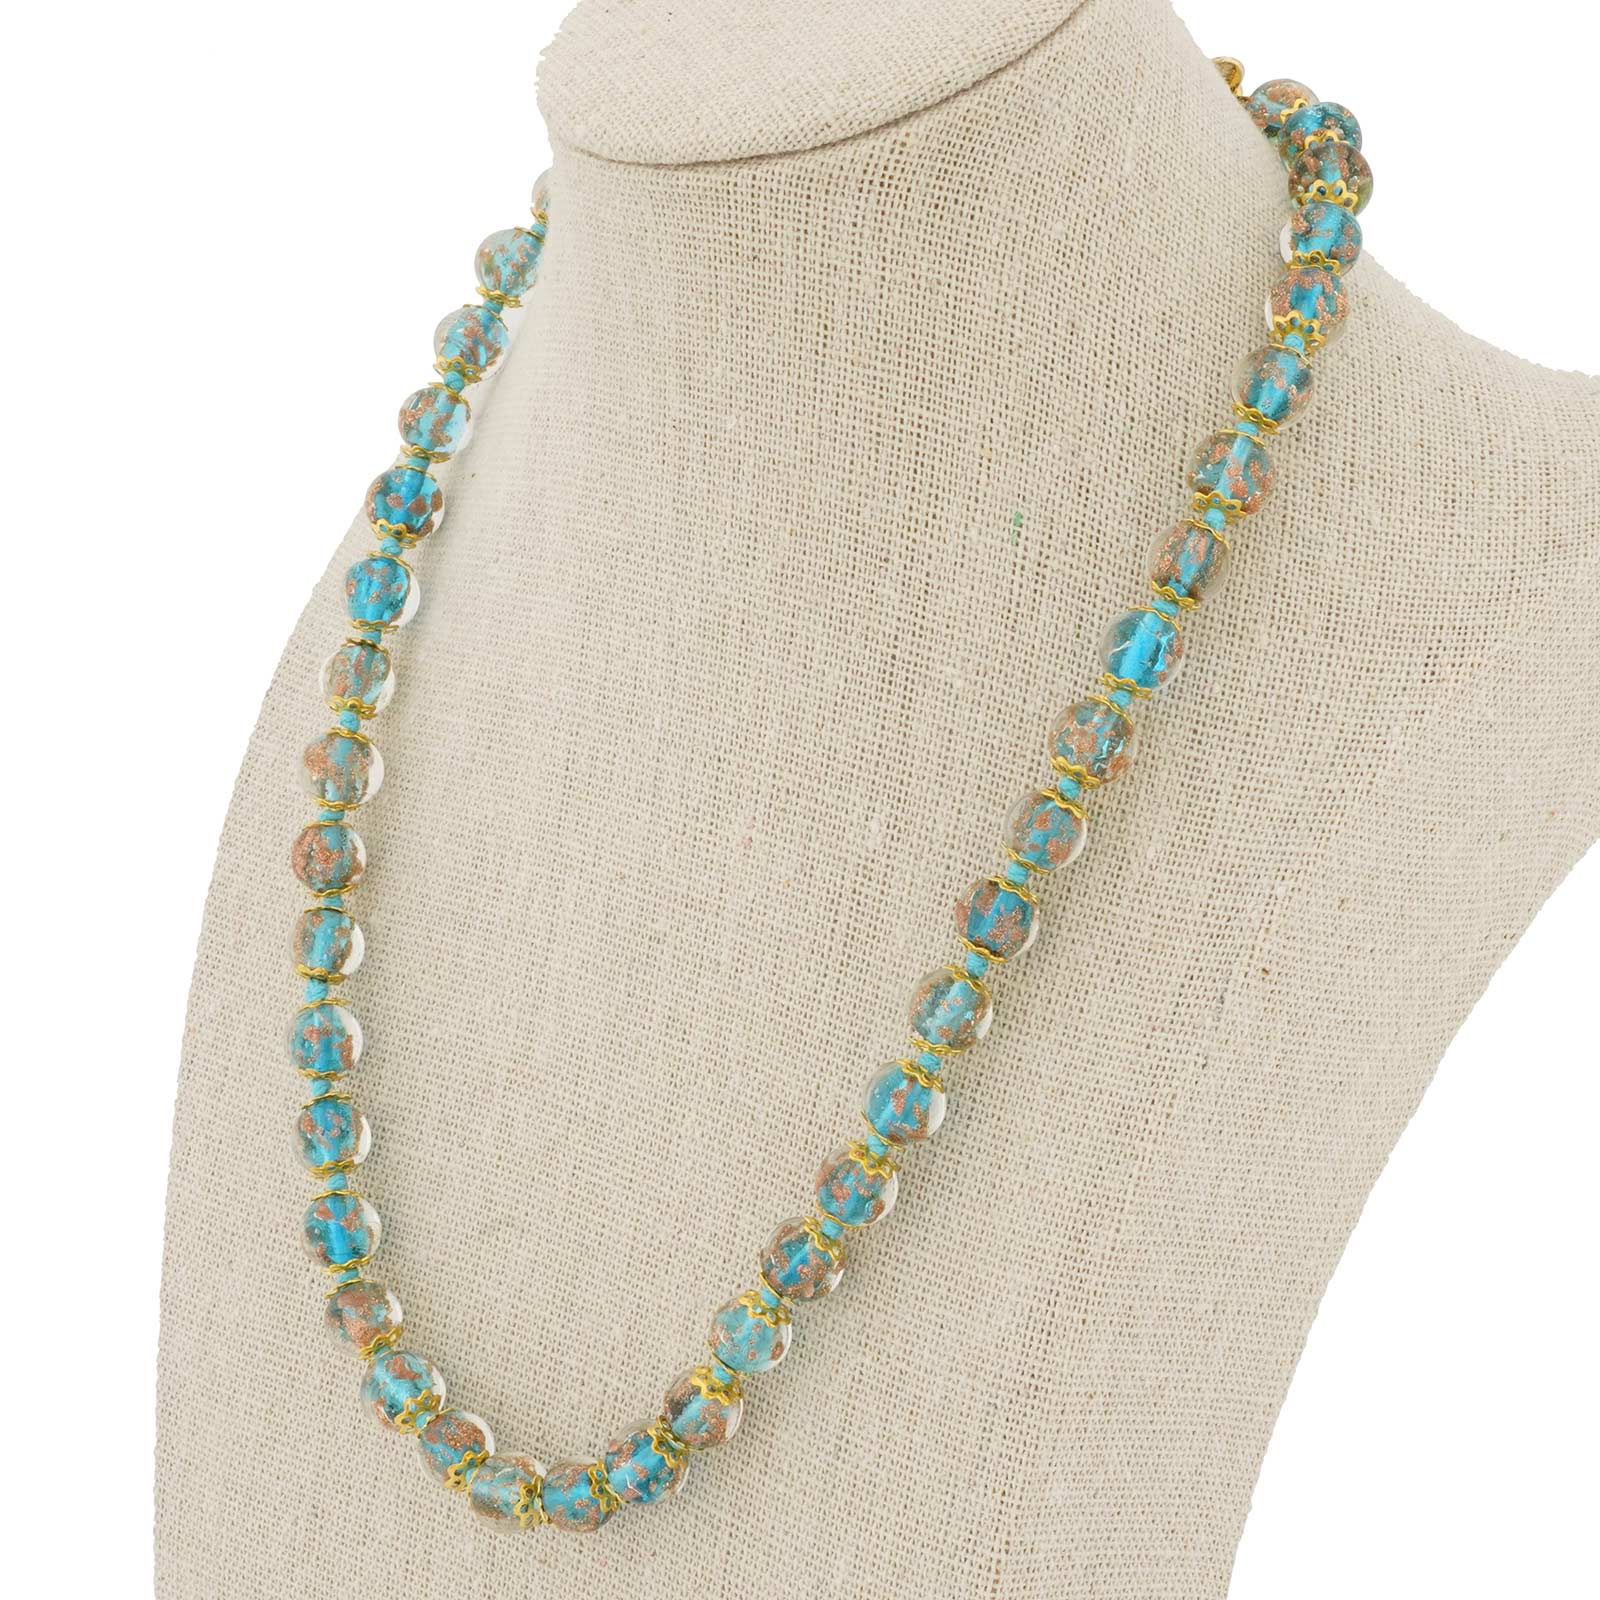 Sommerso Necklace - Teal